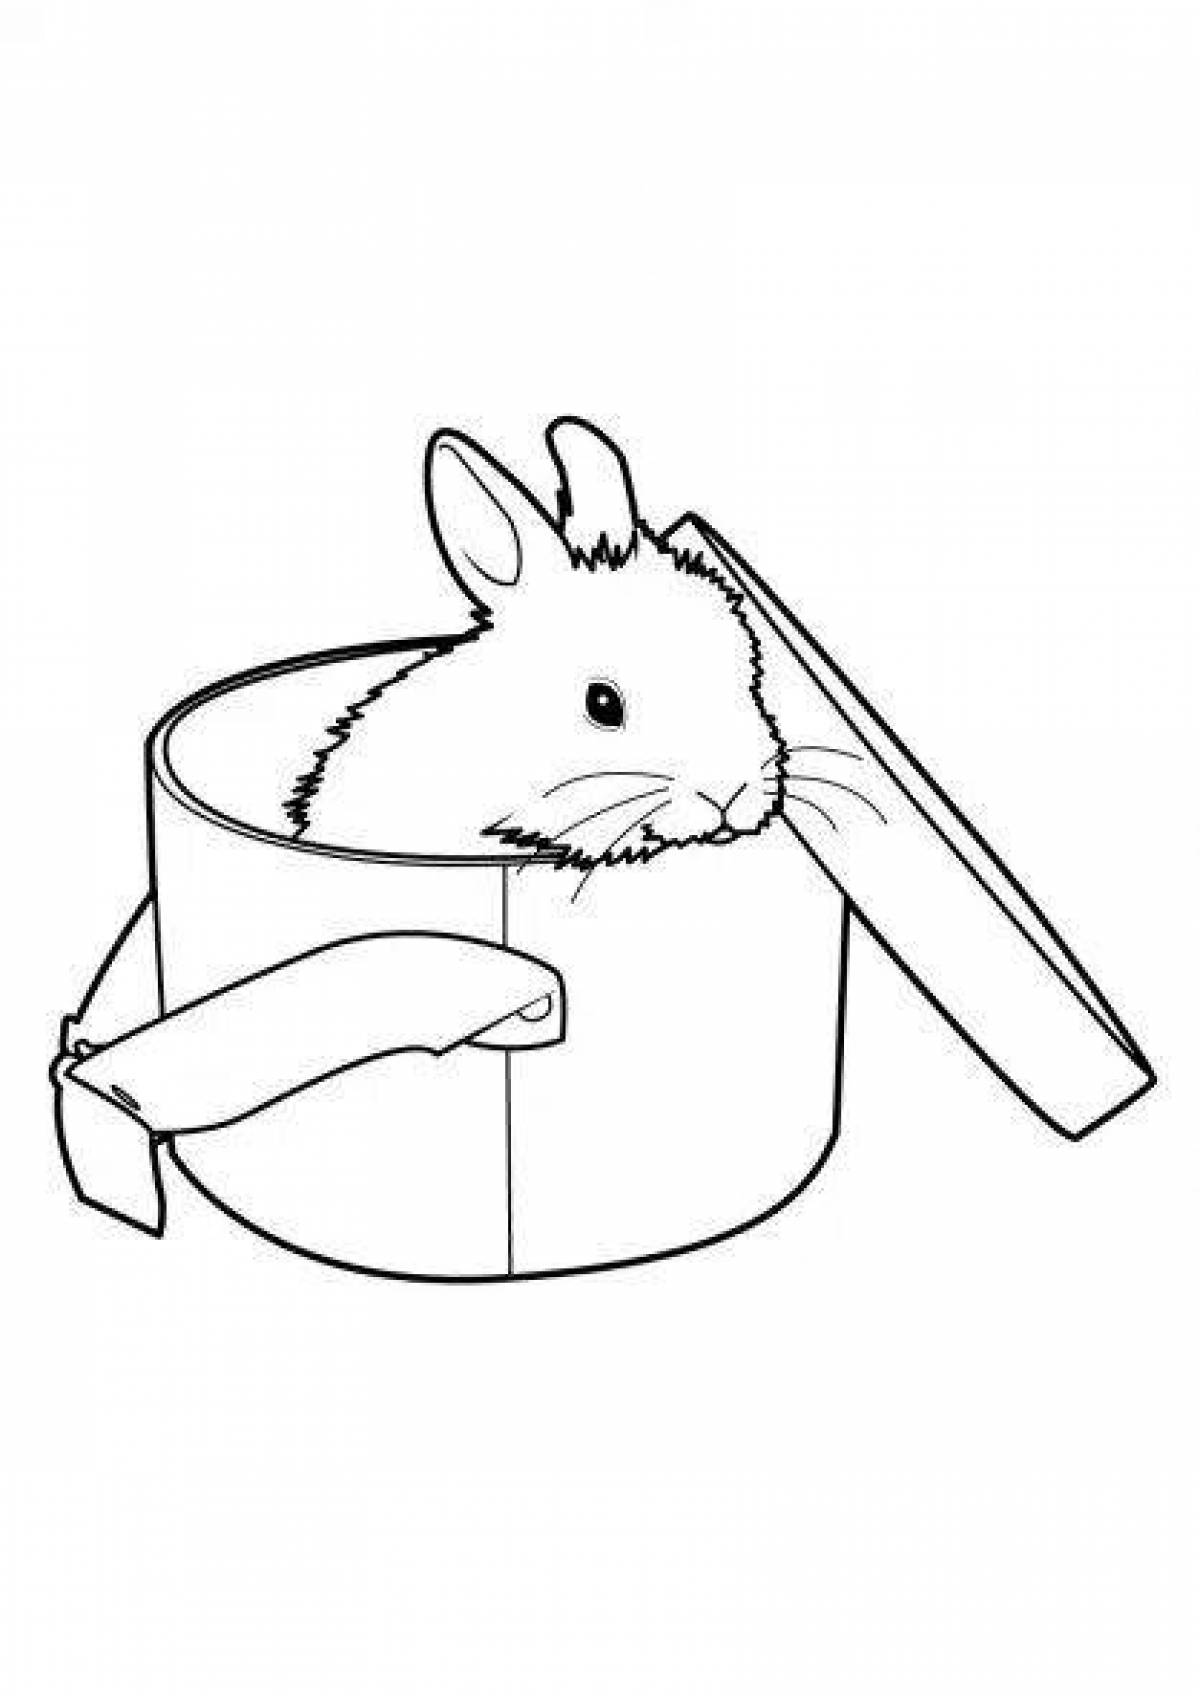 Live cat and rabbit coloring page